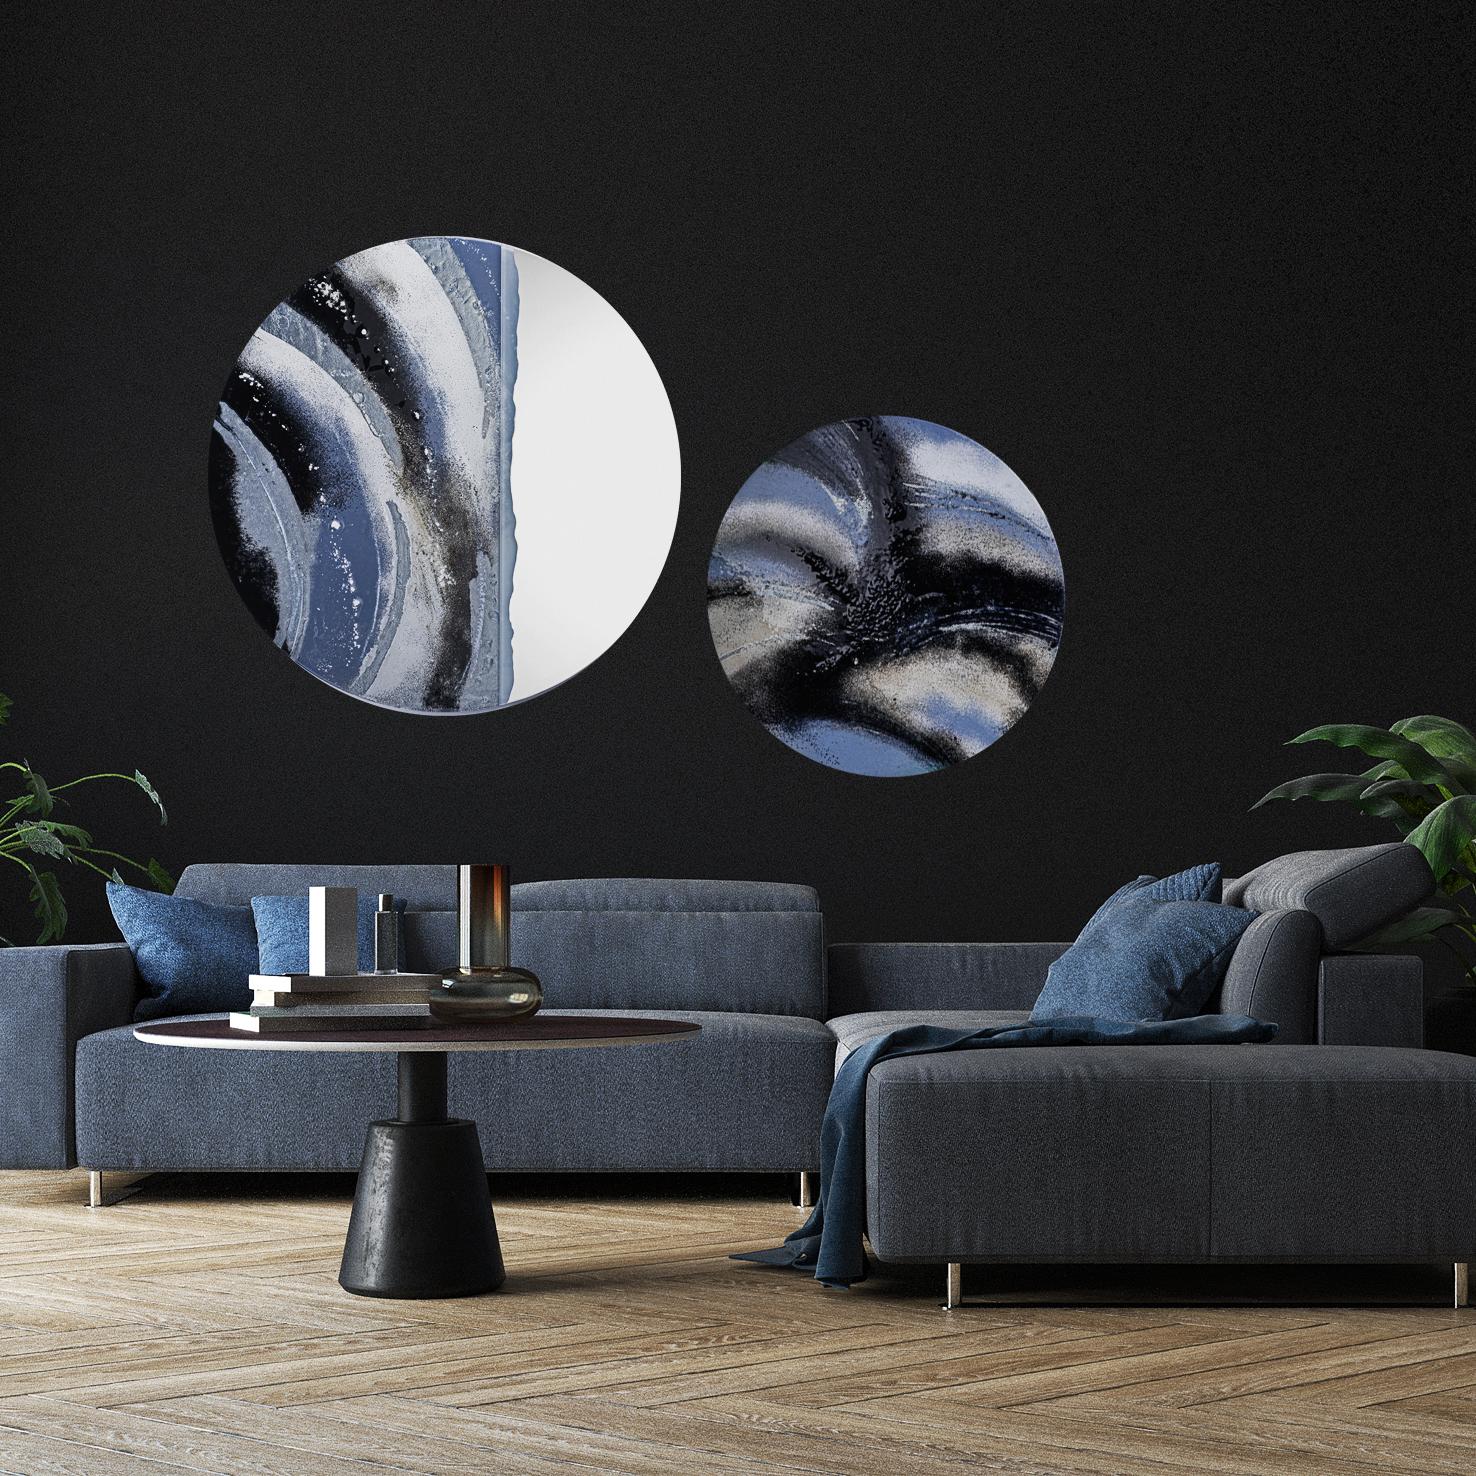 Contemporary and modern round mirror with Murano kind handmade glass colored using metal oxides in white, black, gray and liquid metal in gold color. Limited collection signed by Edith Baranska showed for the first time in Milan 2019. Each piece is